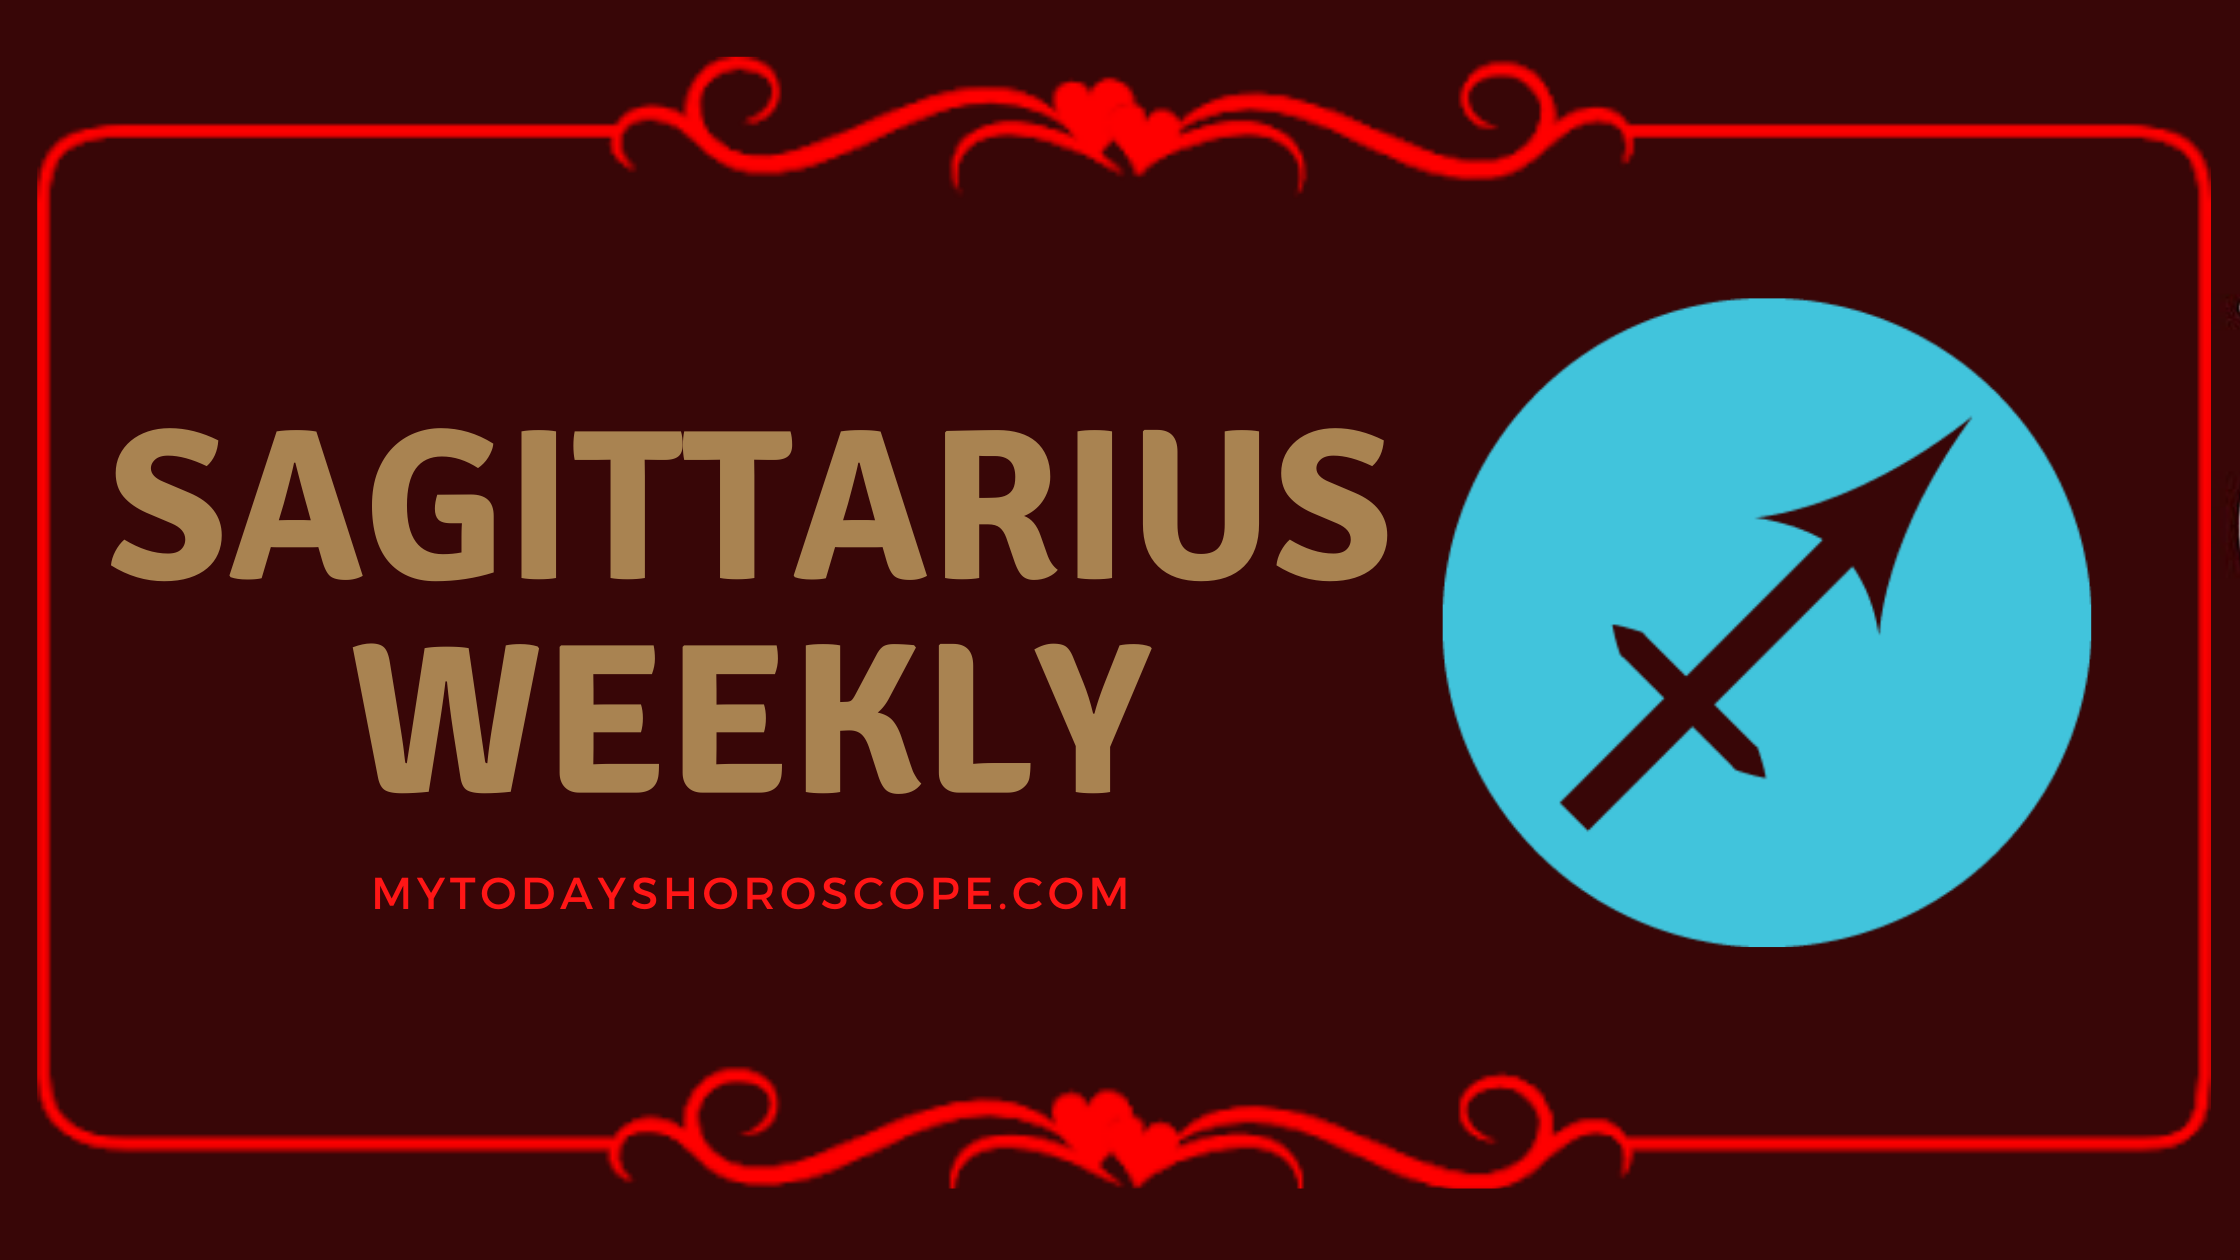 Sagittarius Weekly Horoscope for Love, Work and Well-being